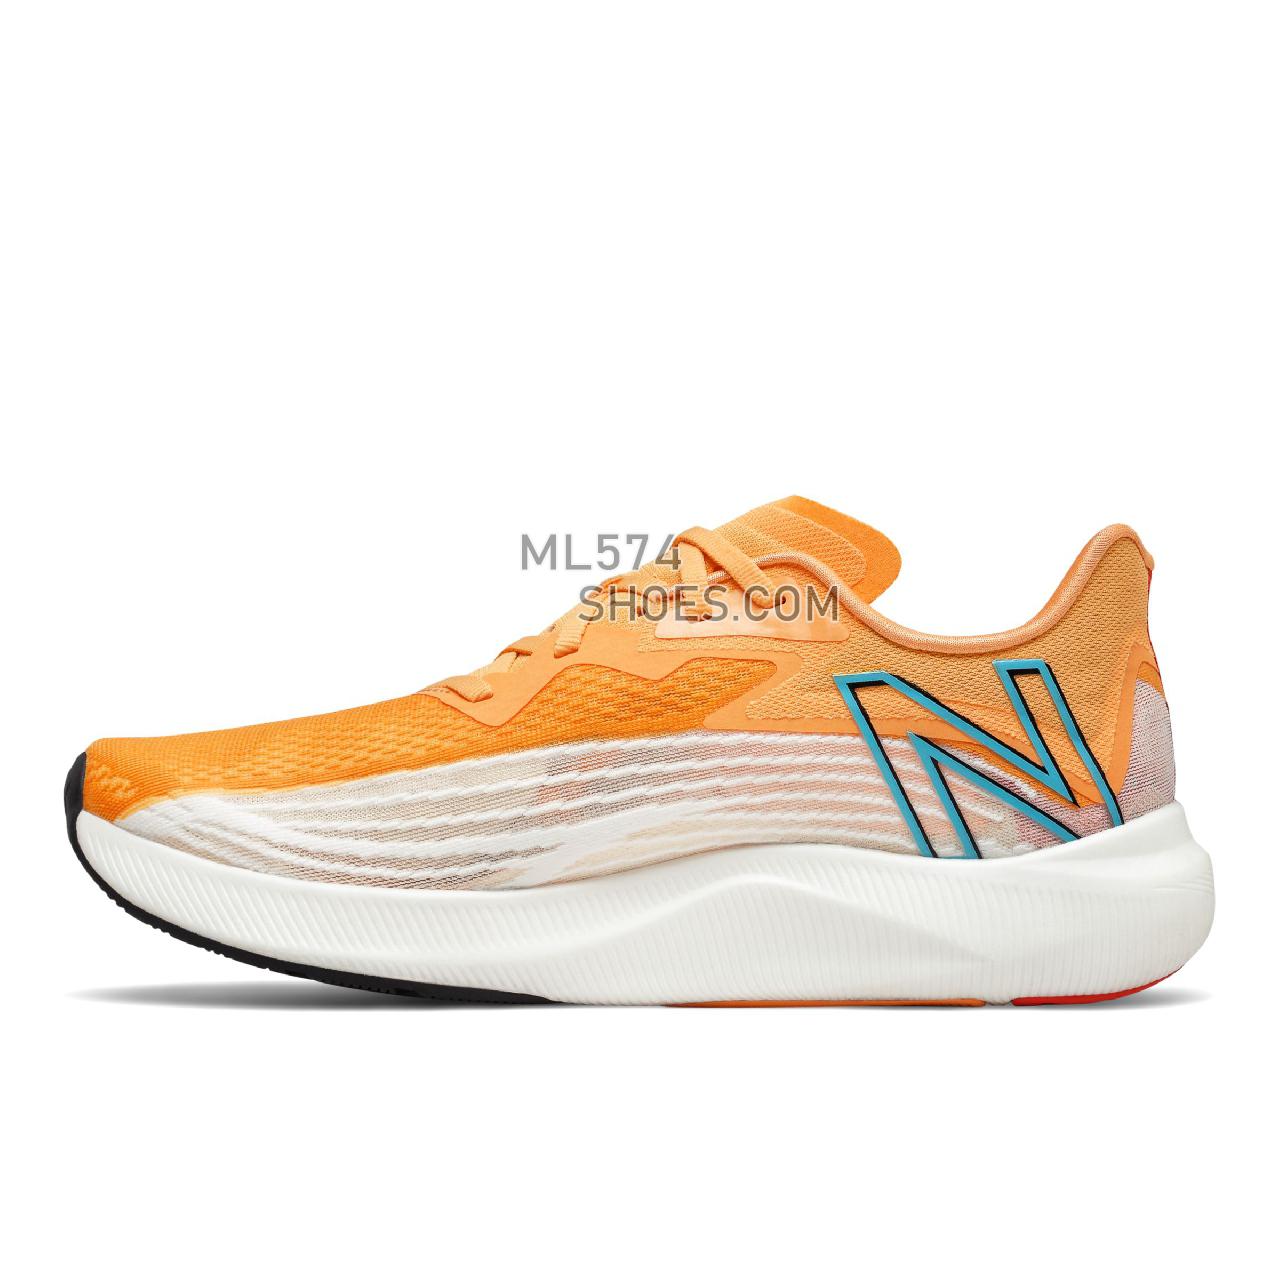 New Balance FuelCell Rebel v2 - Men's Neutral Running - White with Habanero and Virtual Sky - MFCXLG2